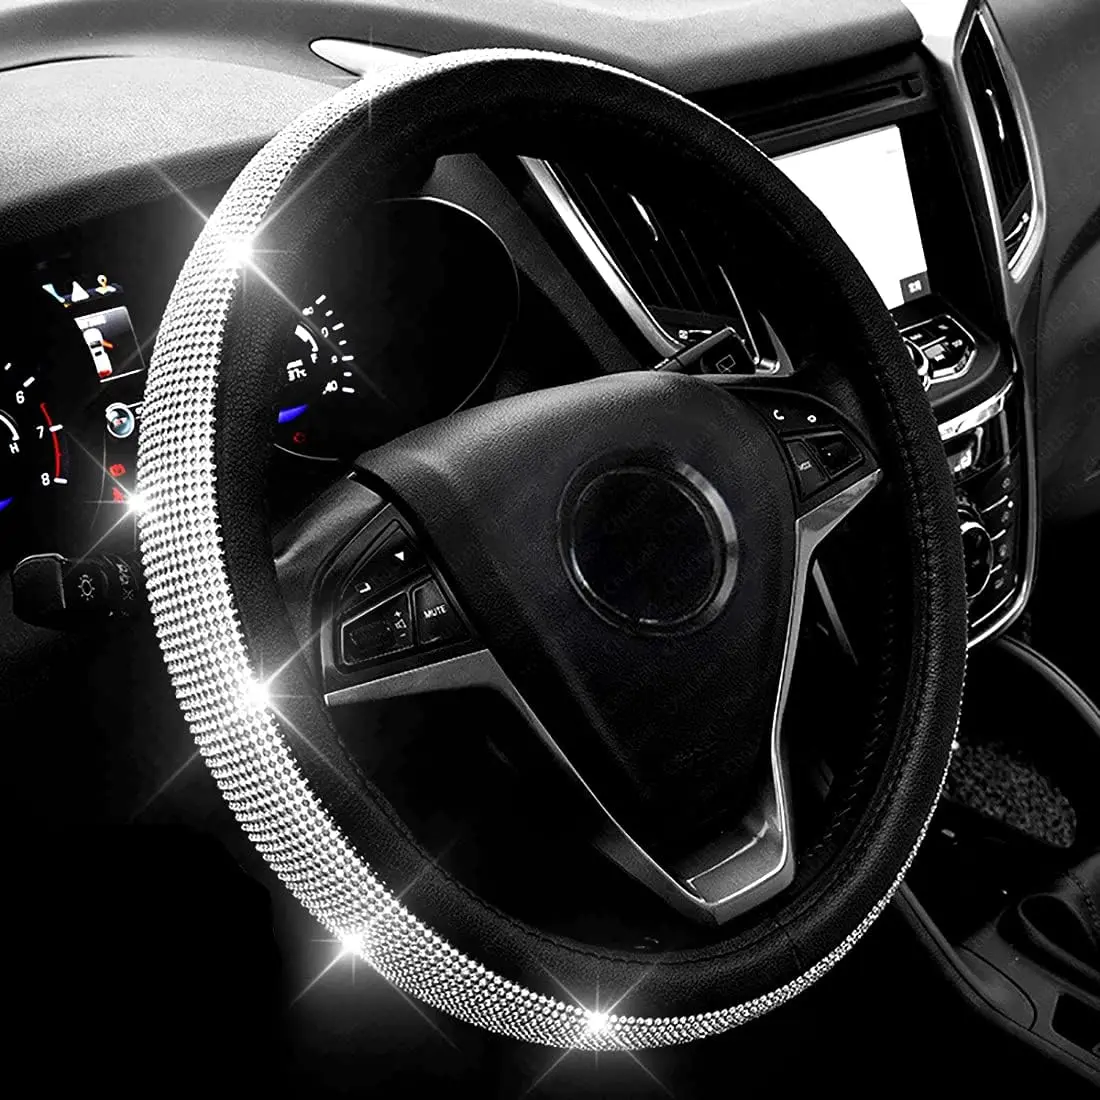 

New Diamond Leather Steering Wheel Cover with Bling Bling Crystal Rhinestones, Universal Fit 38cm Car Wheel Protector